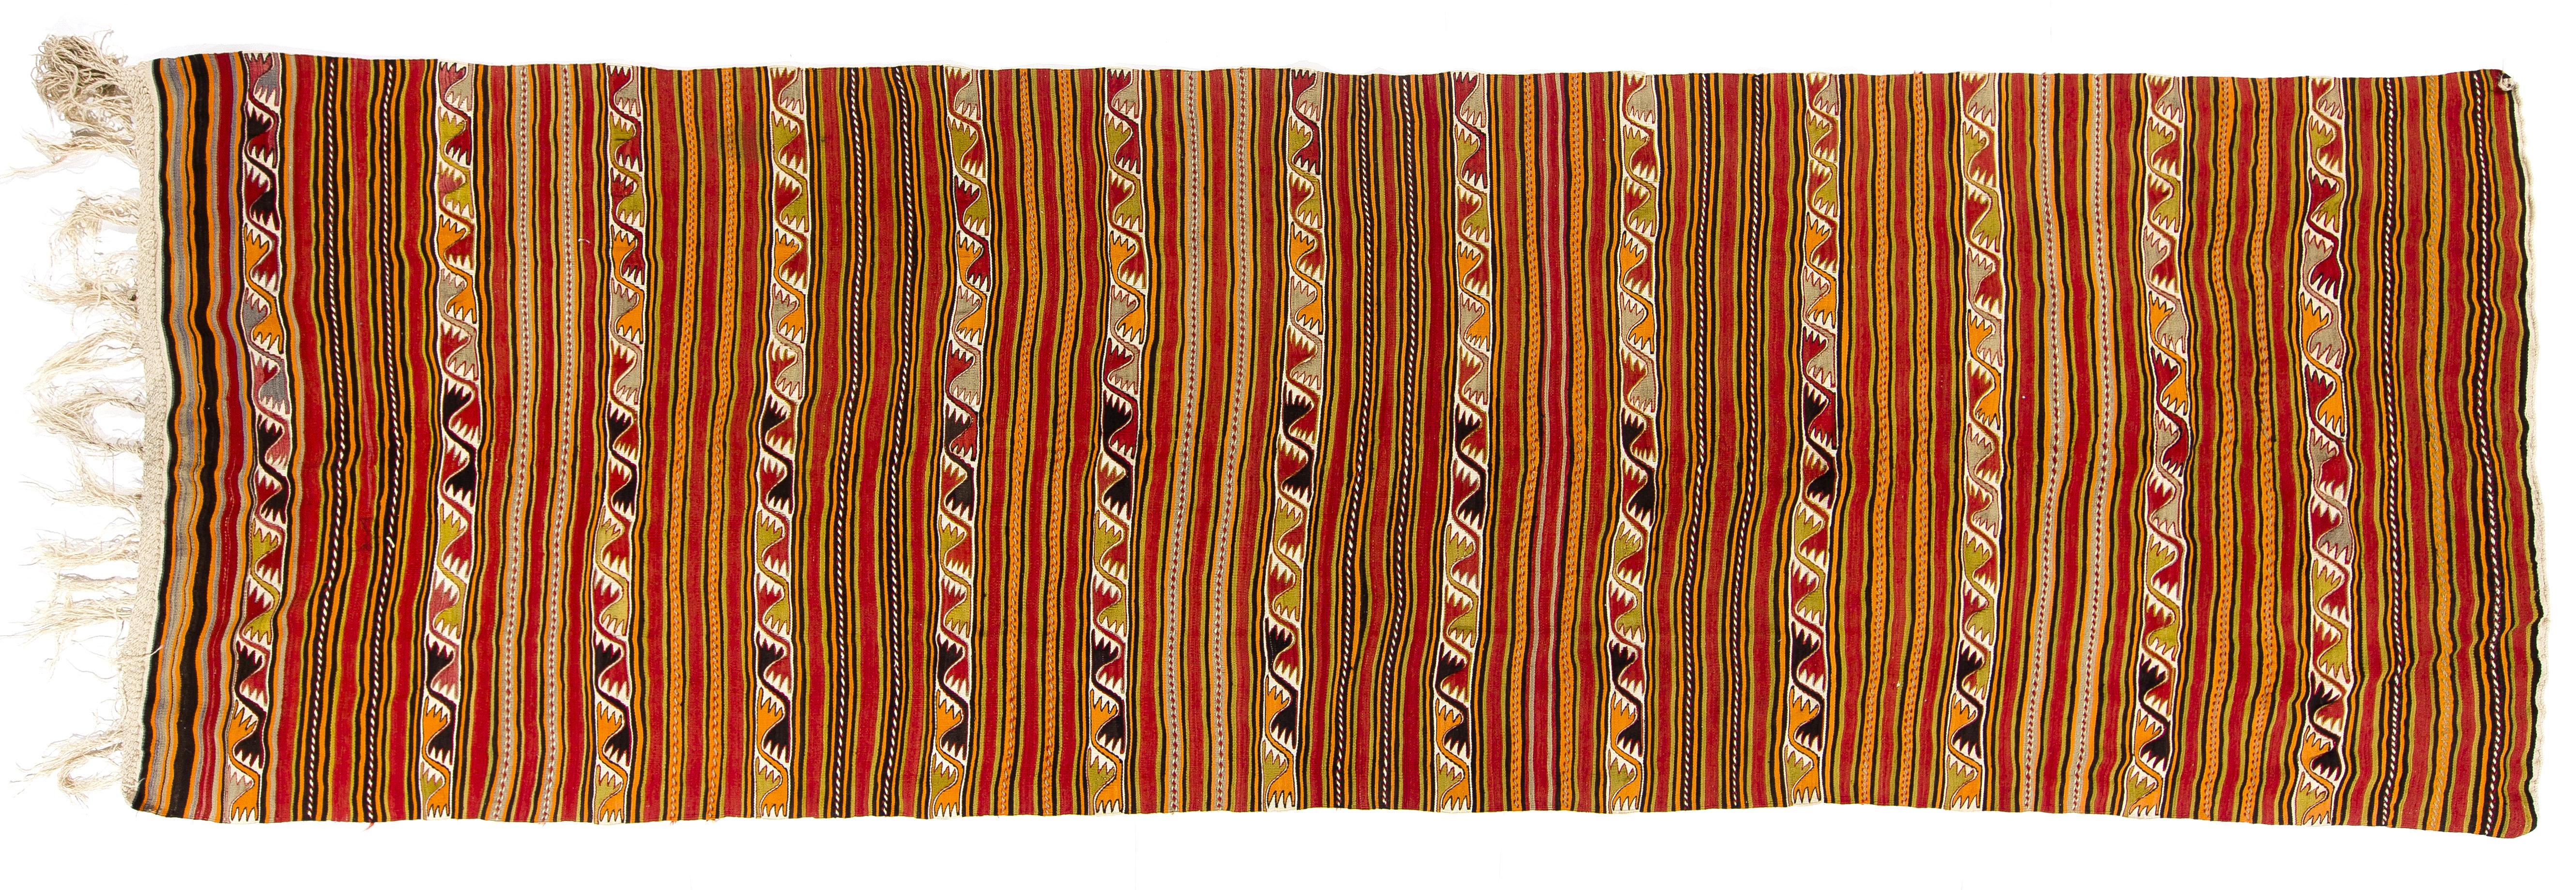 20th Century 5x15.5 Ft Colorful Vintage Striped Turkish Runner Kilim 'Flat Weave', 100% Wool For Sale